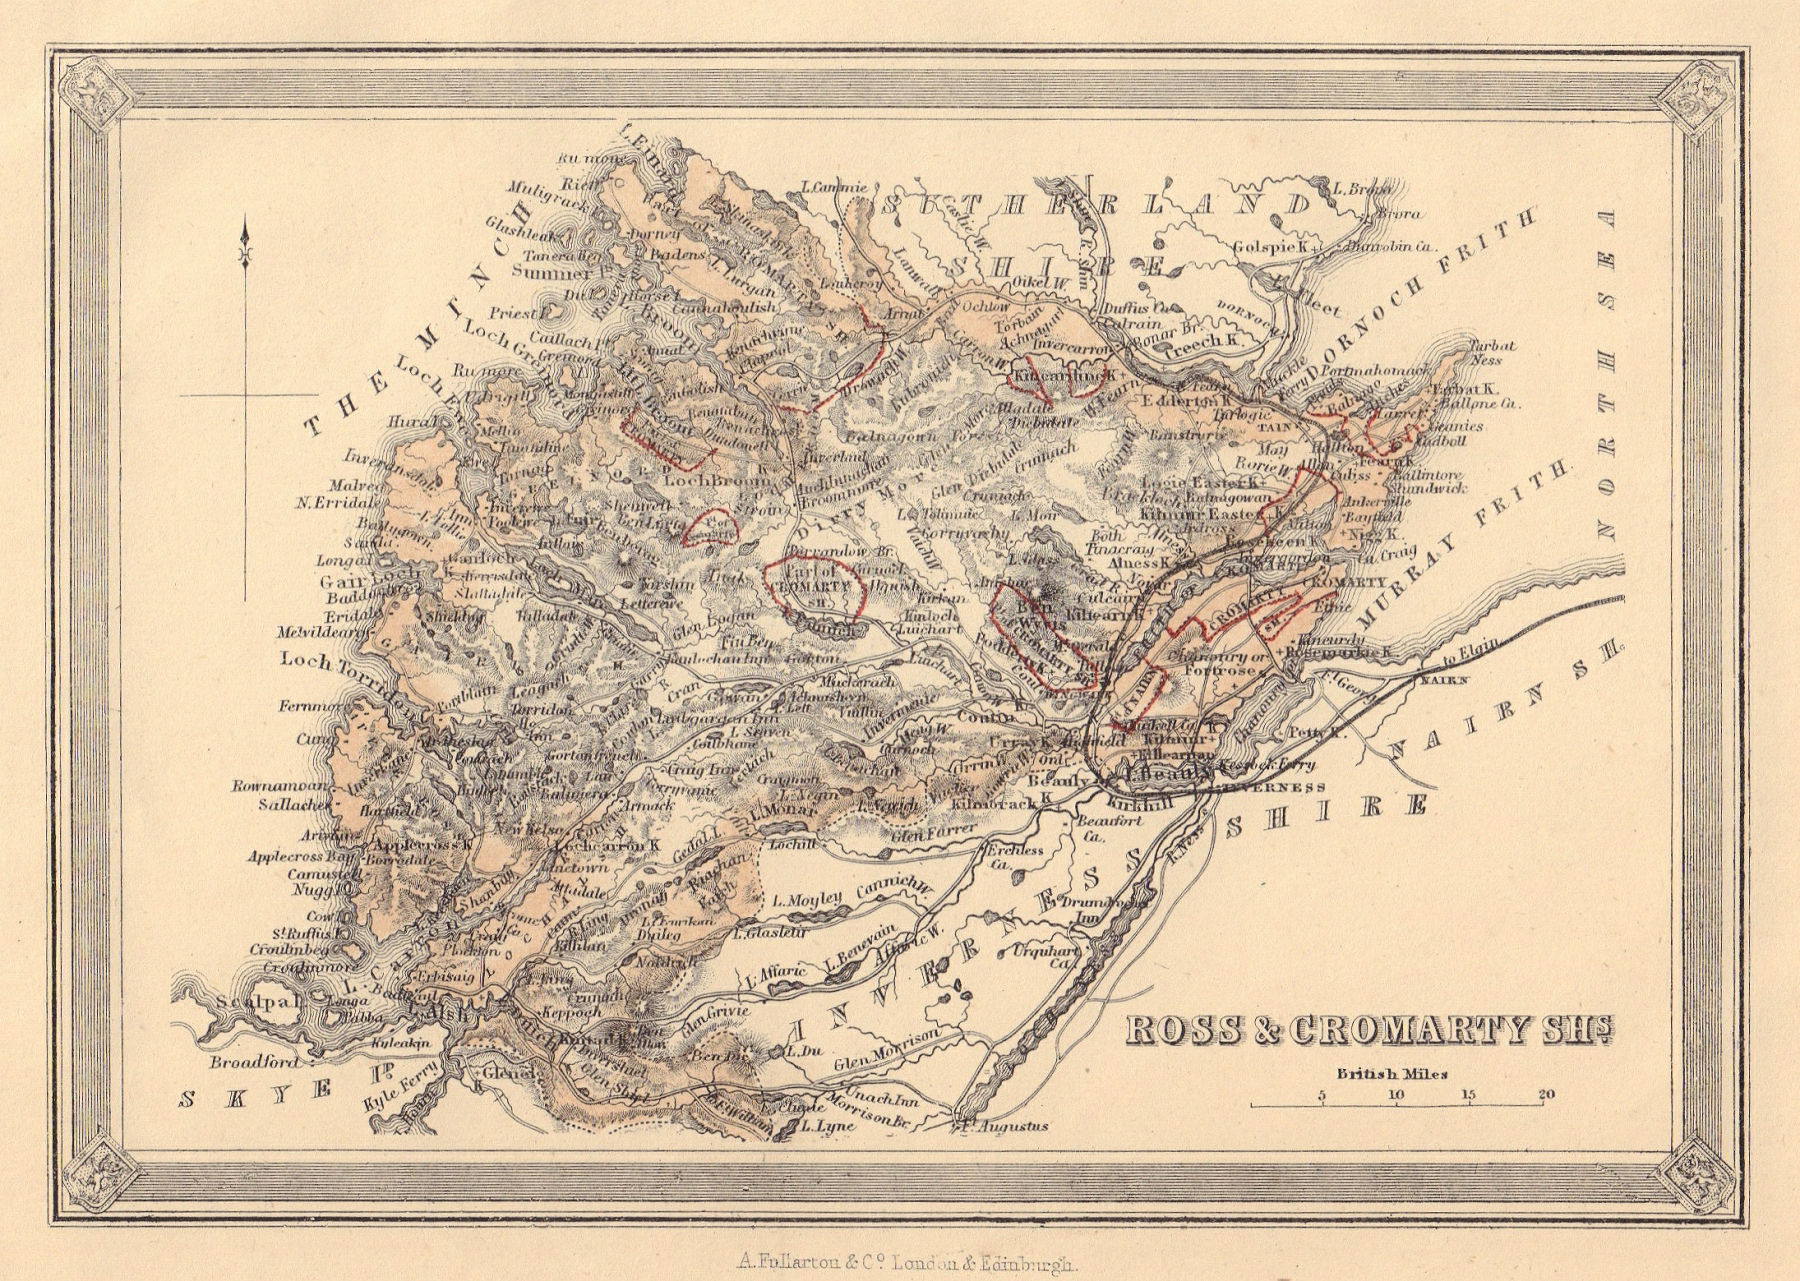 Associate Product Decorative antique county map of Ross-shire & Cromartyshire. FULLARTON 1866